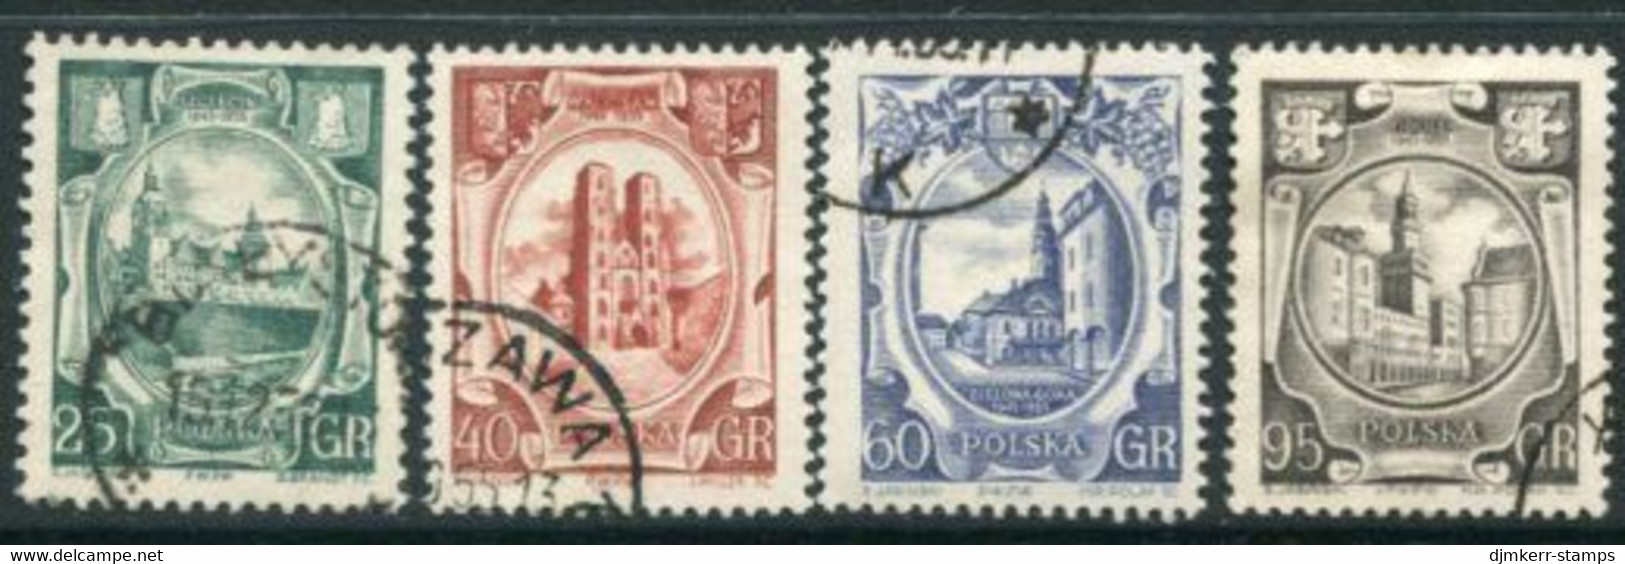 POLAND 1955 Incorporation Of Western Territories Used  Michel 942-45 - Usados